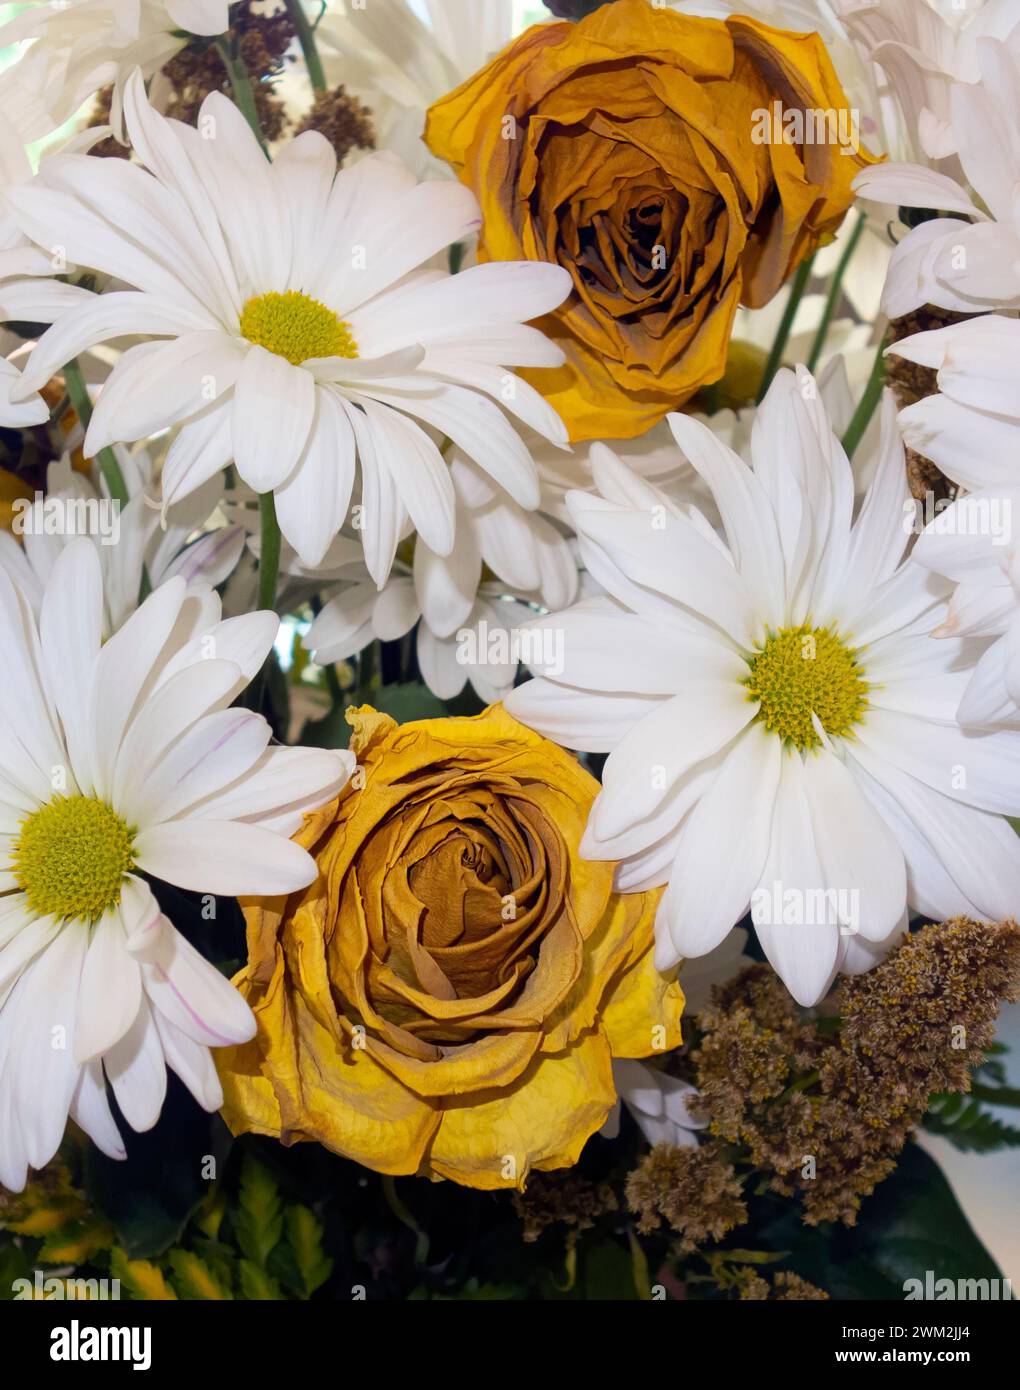 White daisies and dried yellow roses arrangement. Stock Photo